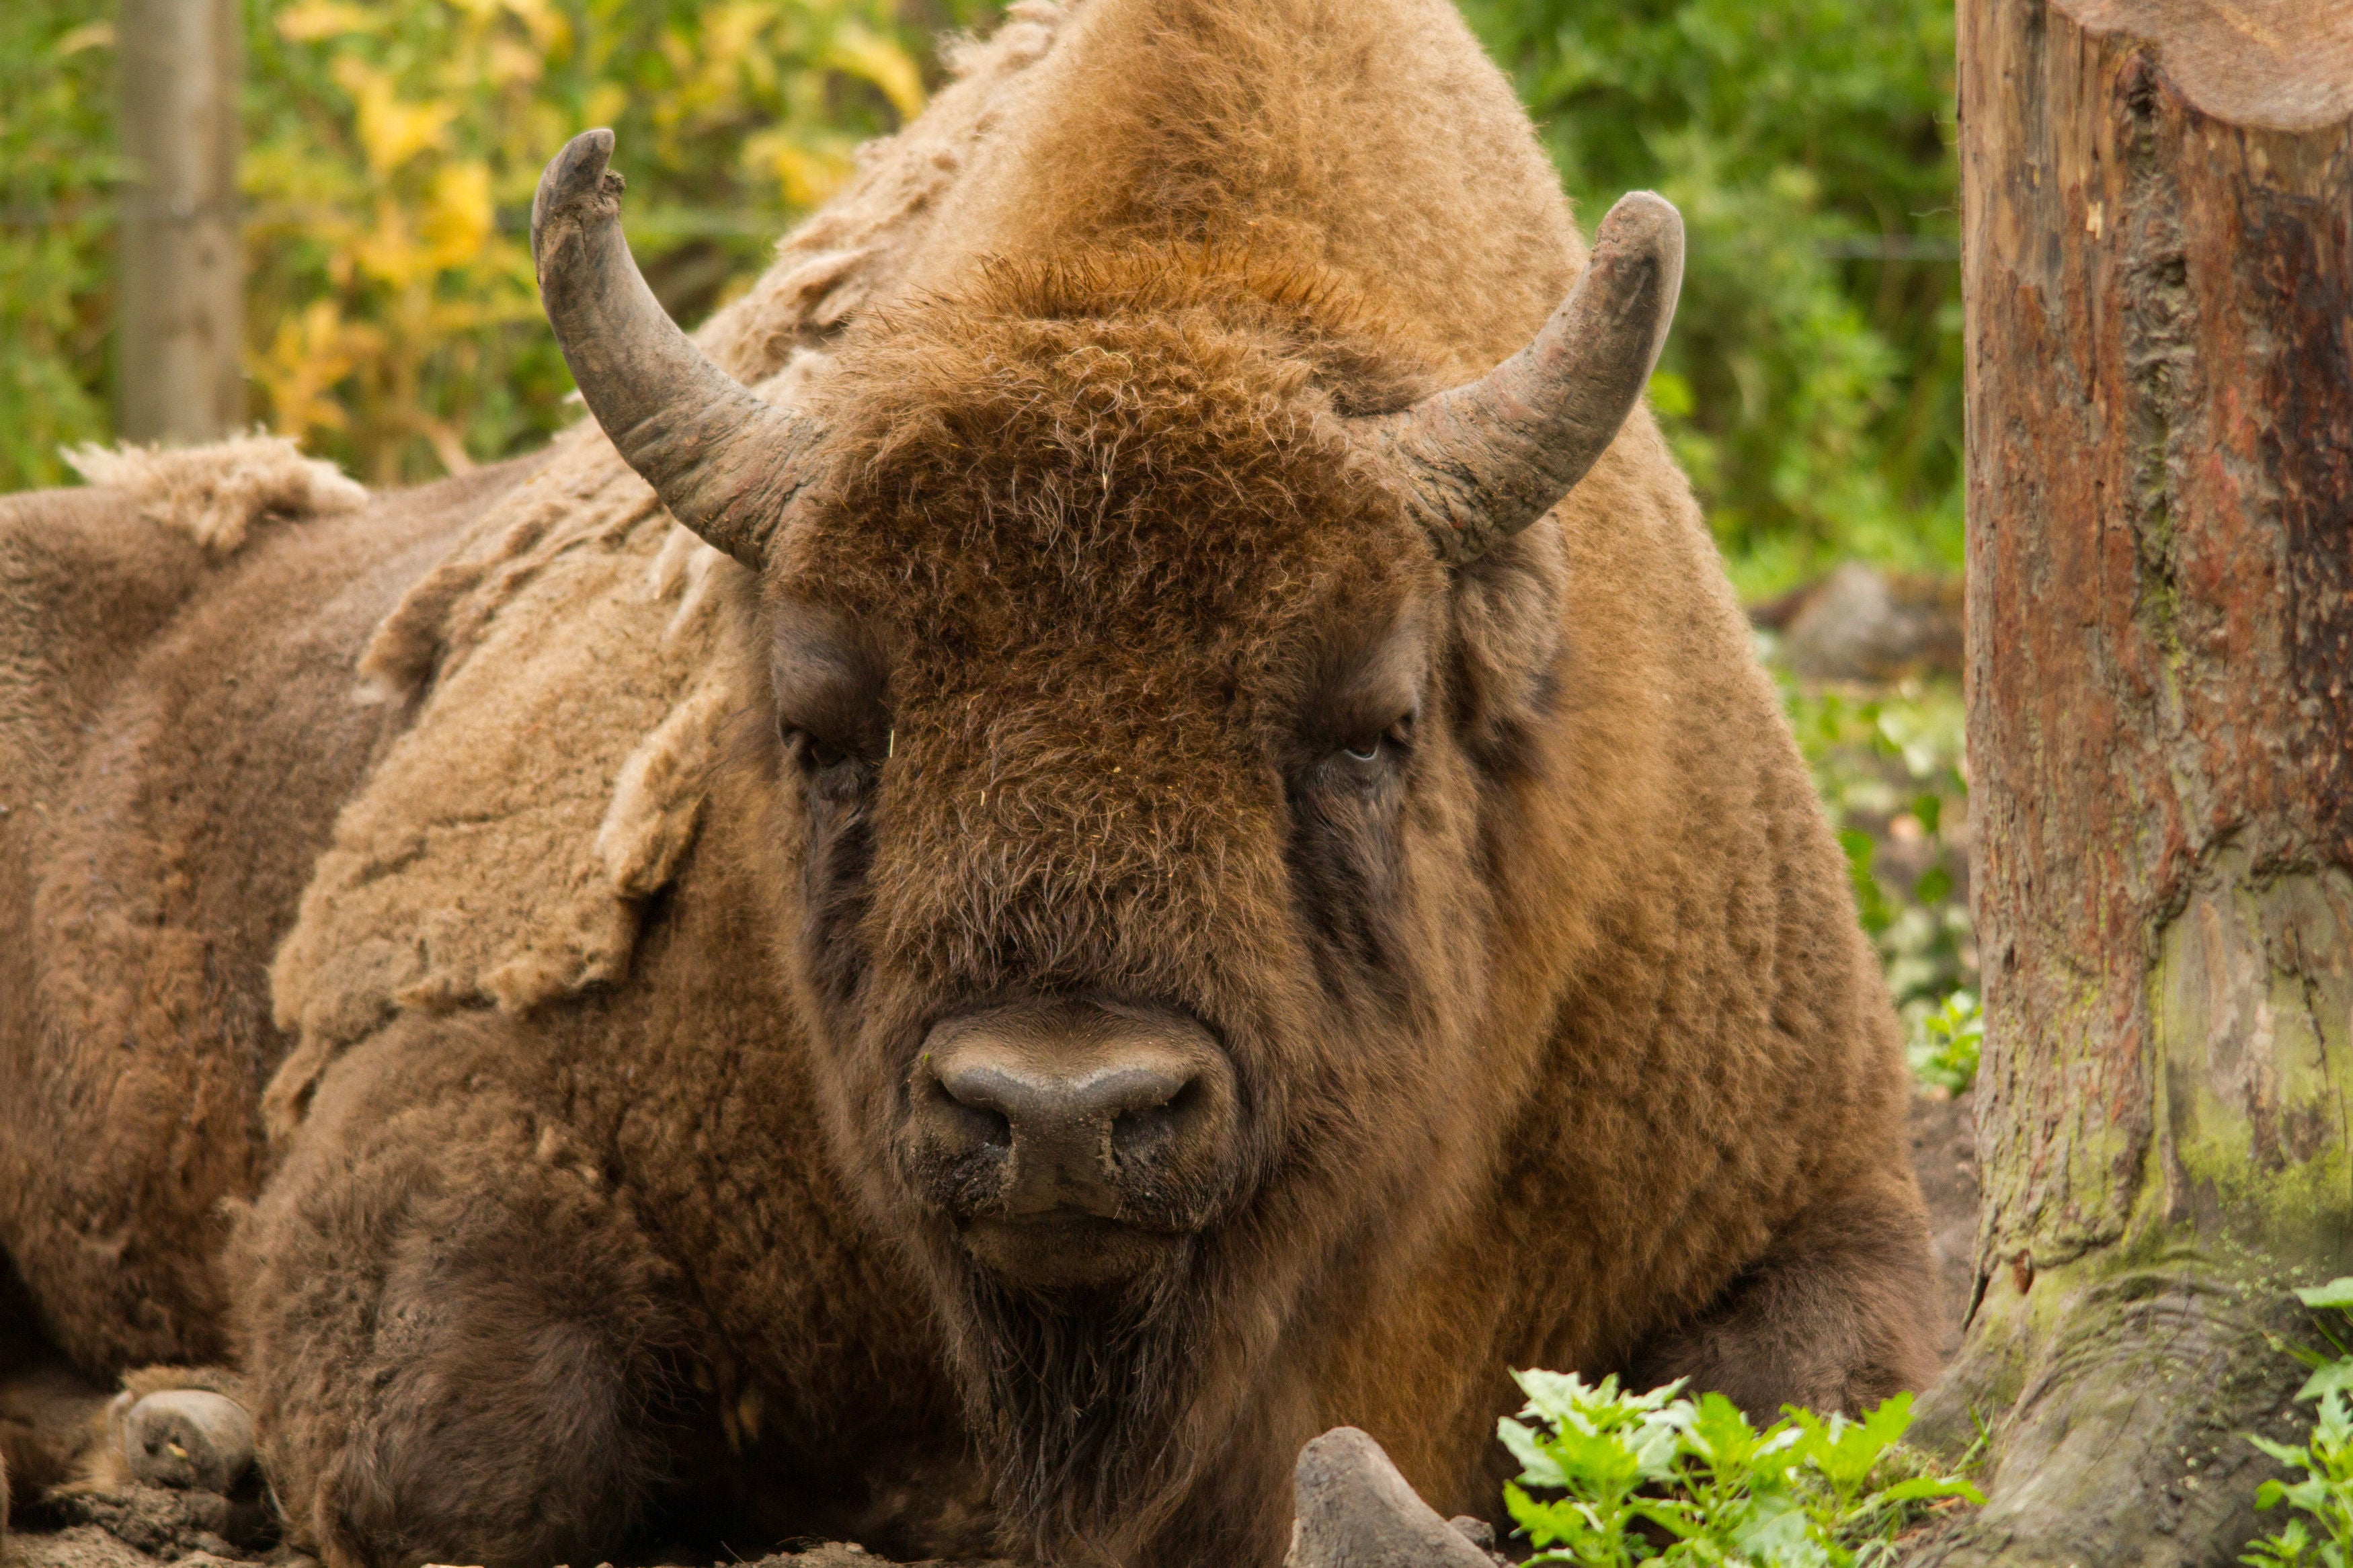 'Bison turn up the turf and thereby diversify the forest floor'